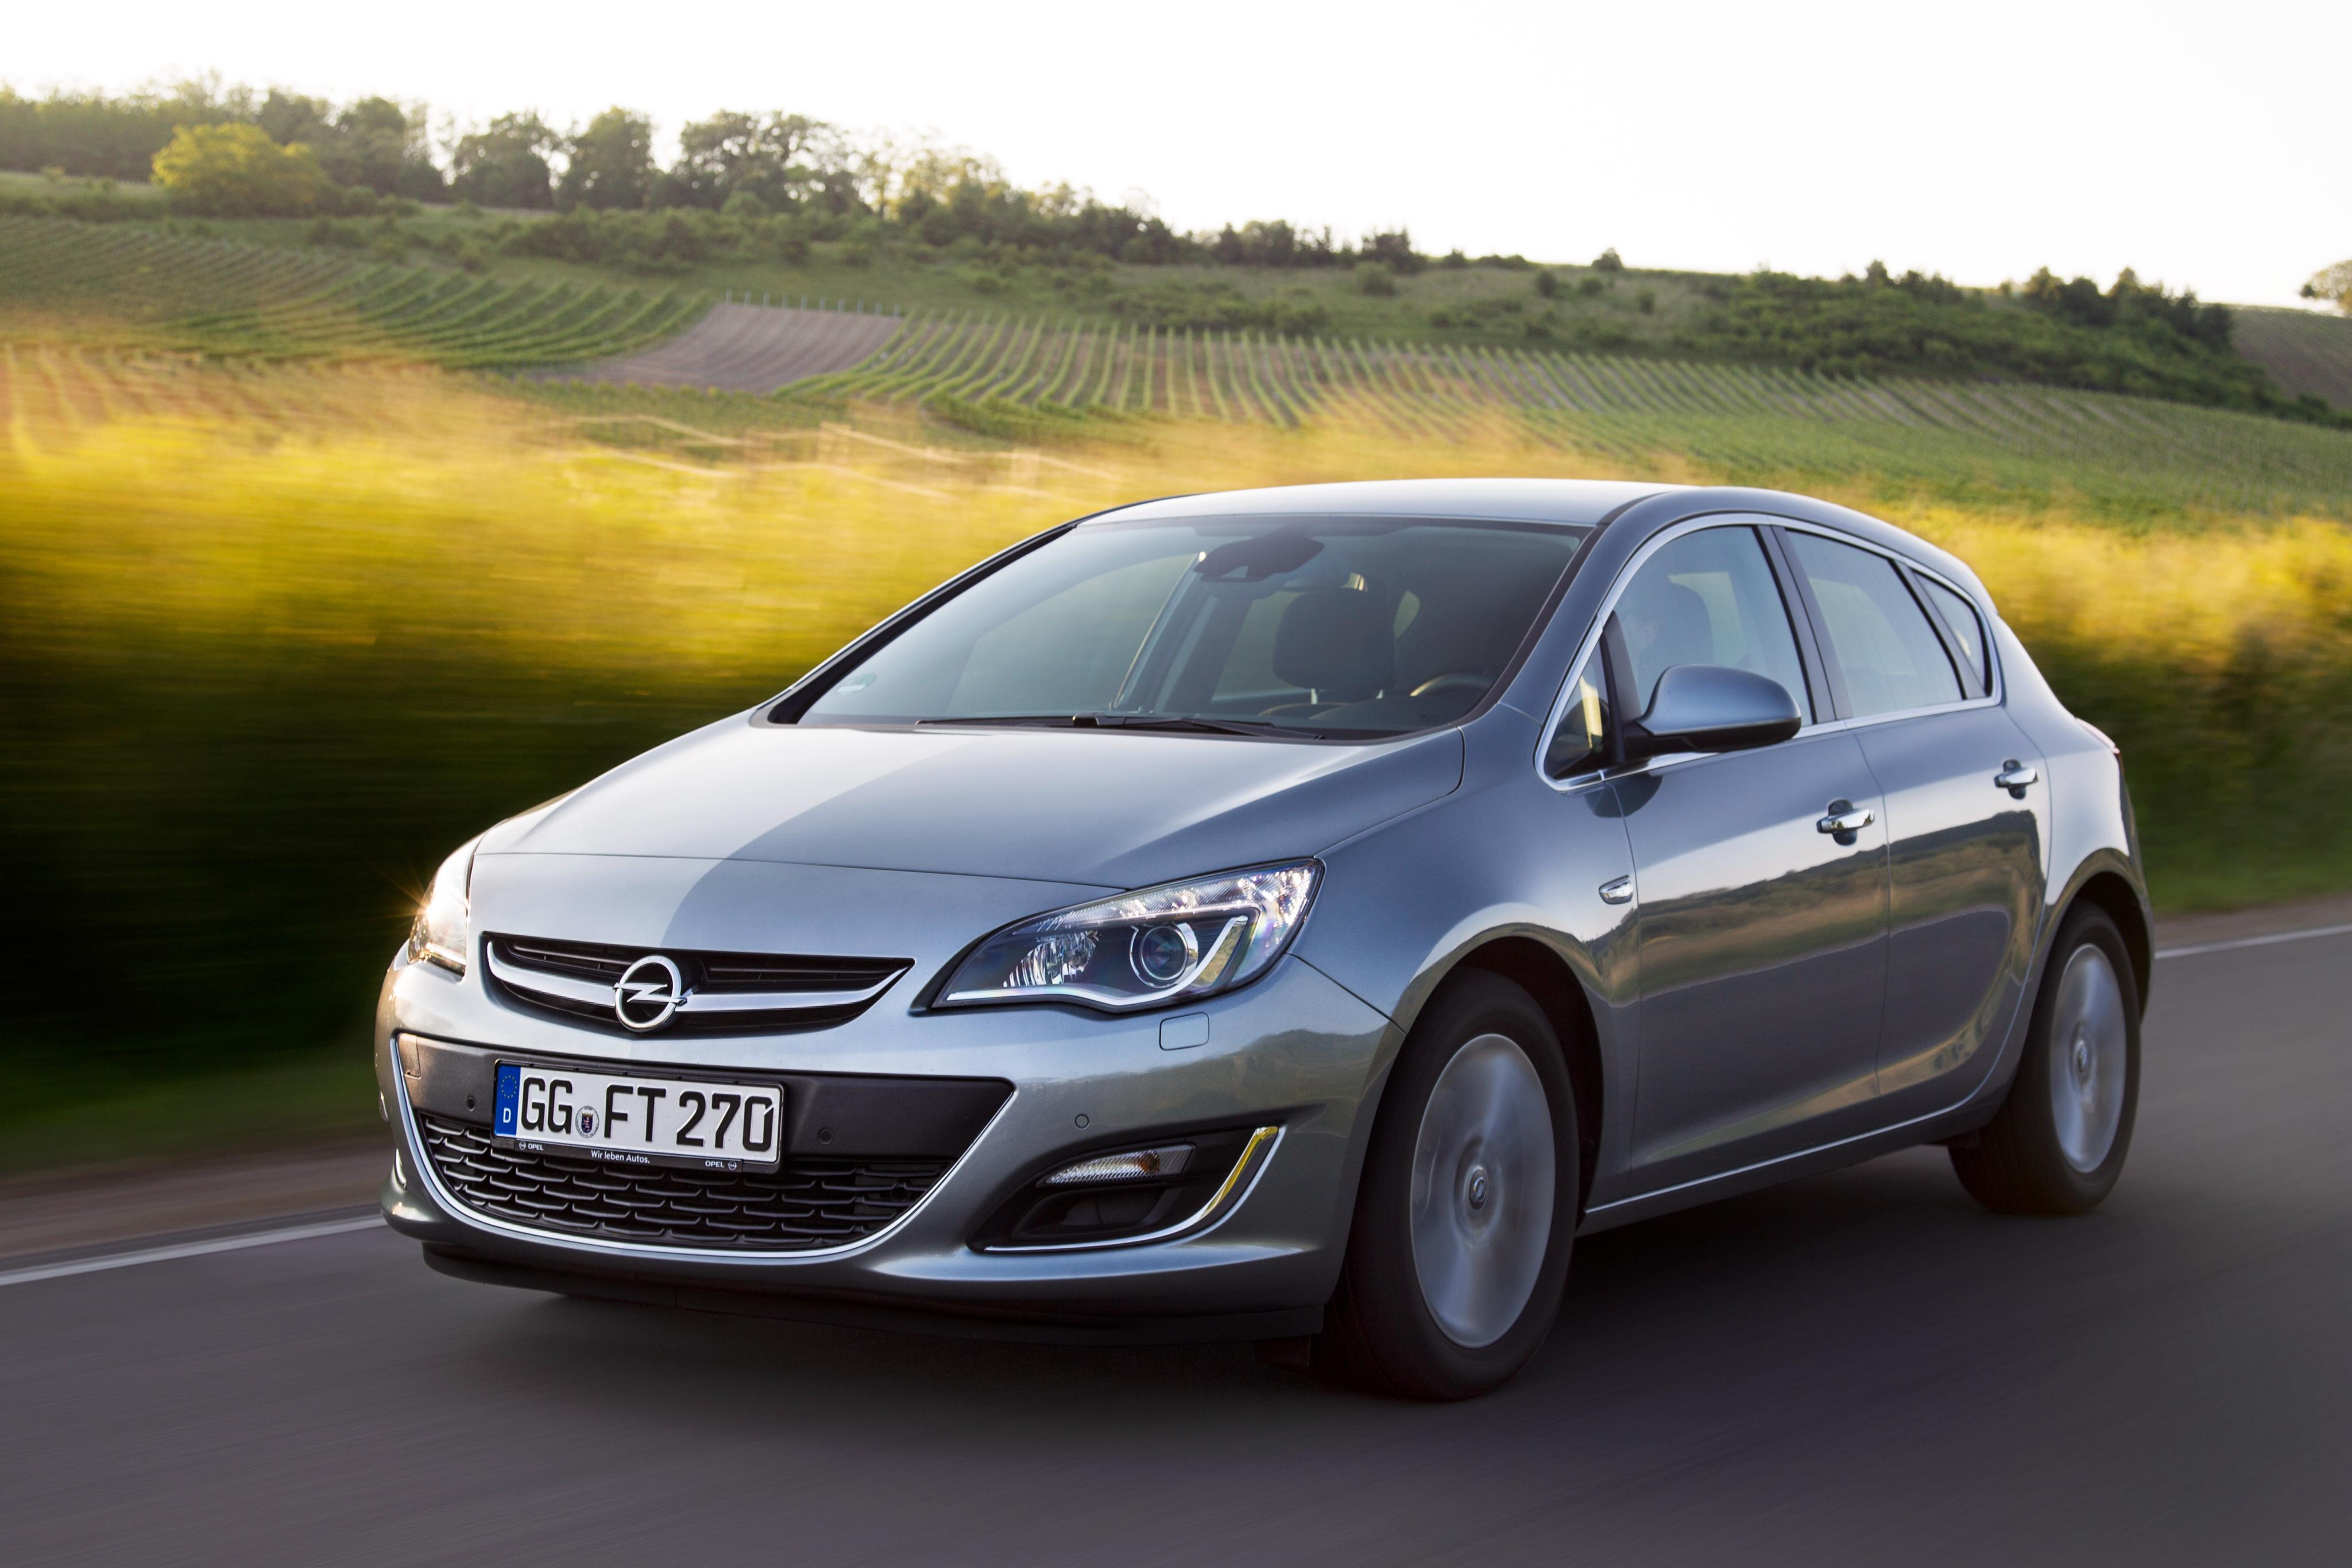 Astra 1.7 download. Opel Astra j 2015. Opel Astra 2015.